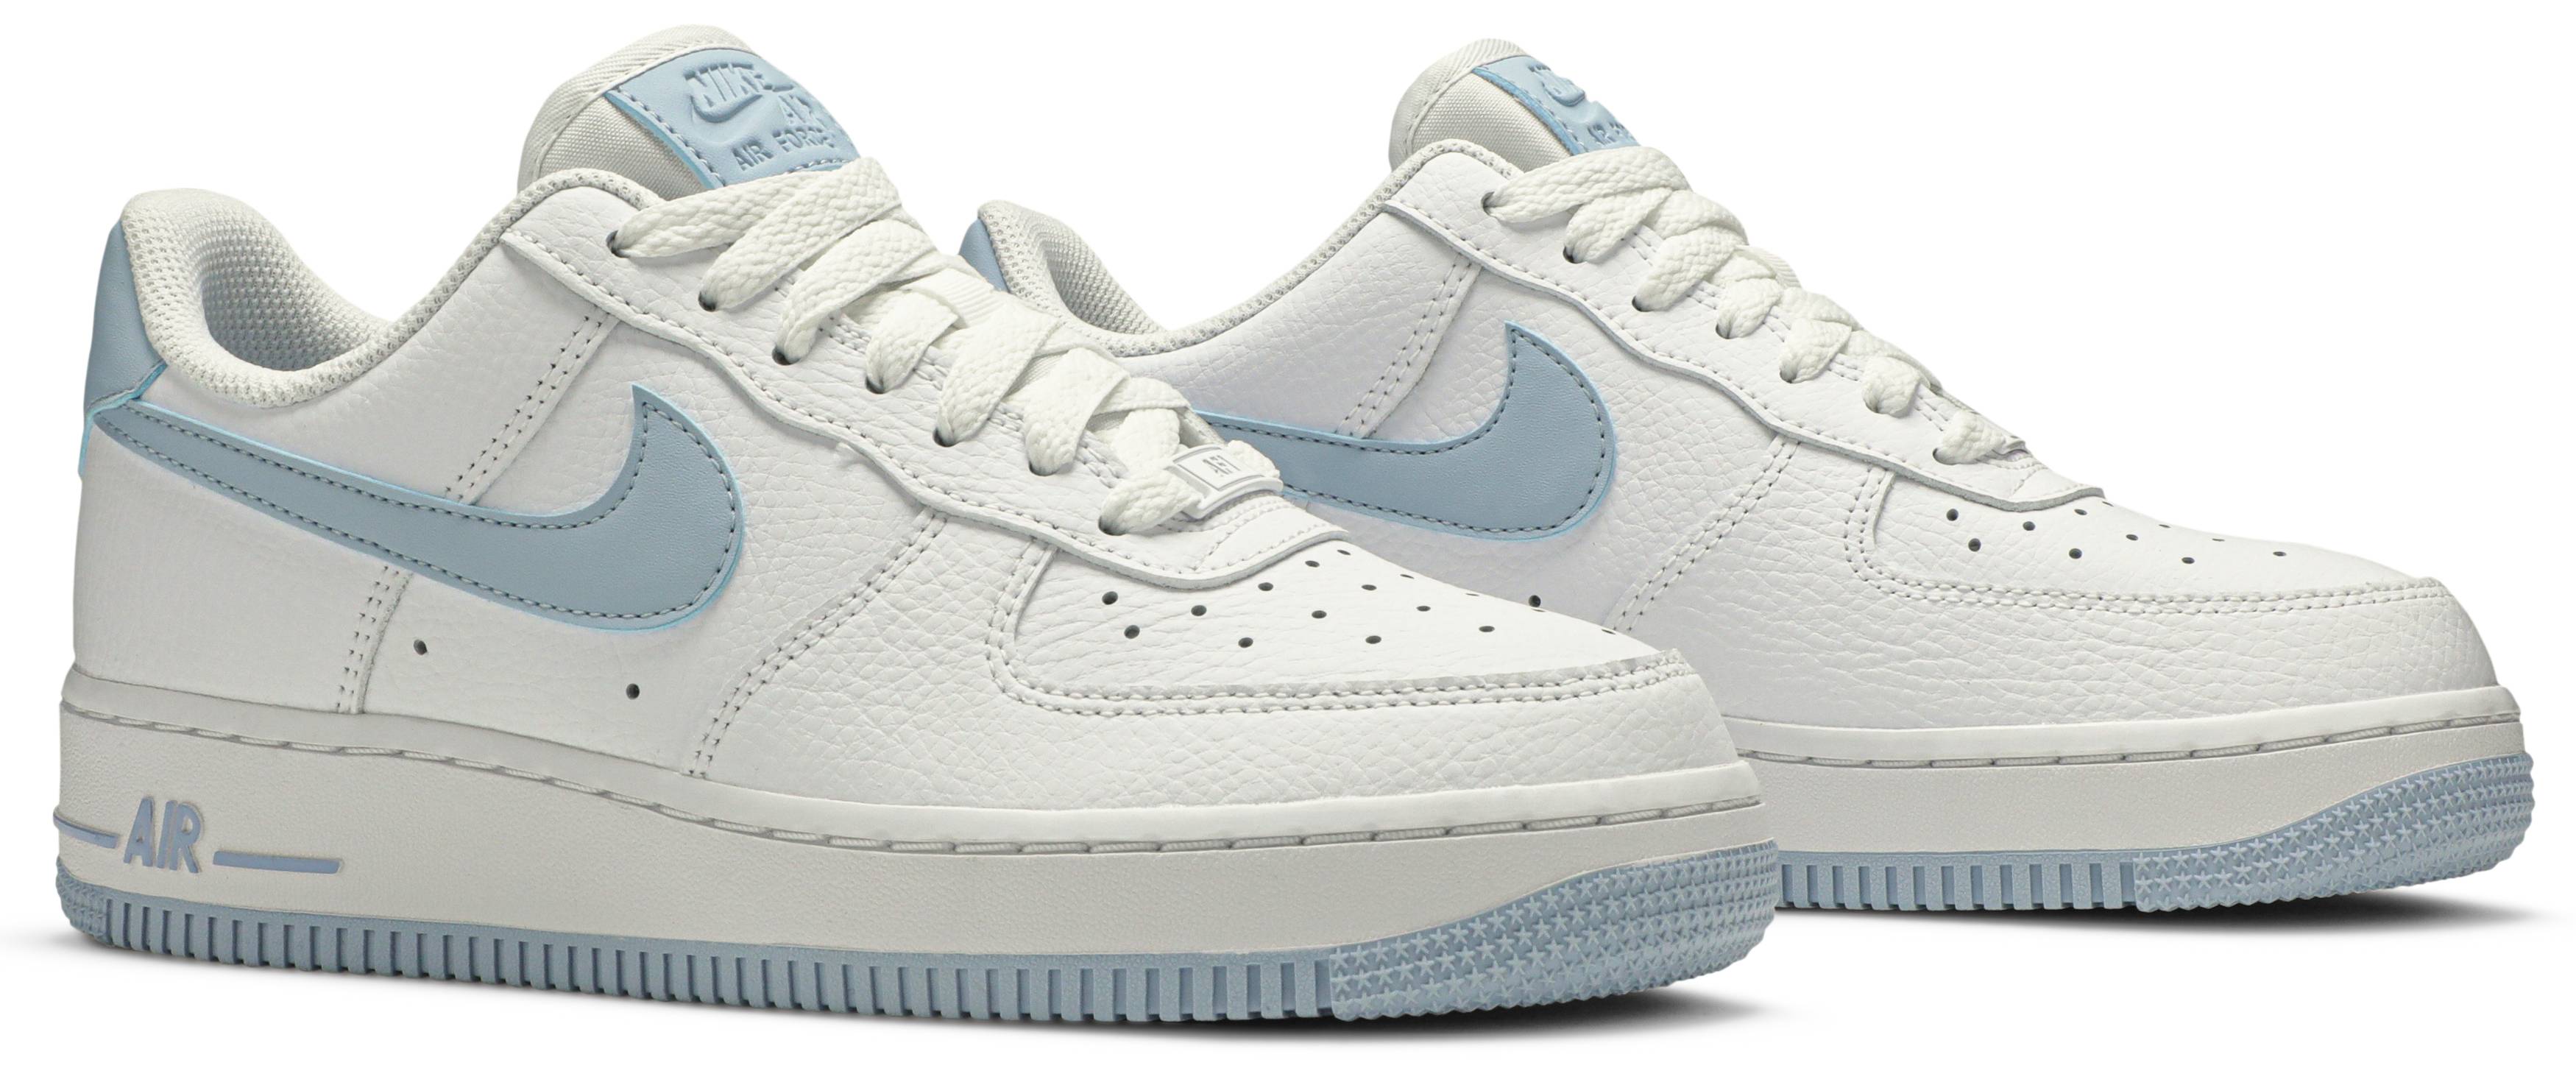 Wmns Air Force 1 Low '07 Patent 'Light Armory Blue' - Nike - AH0287 104 ...